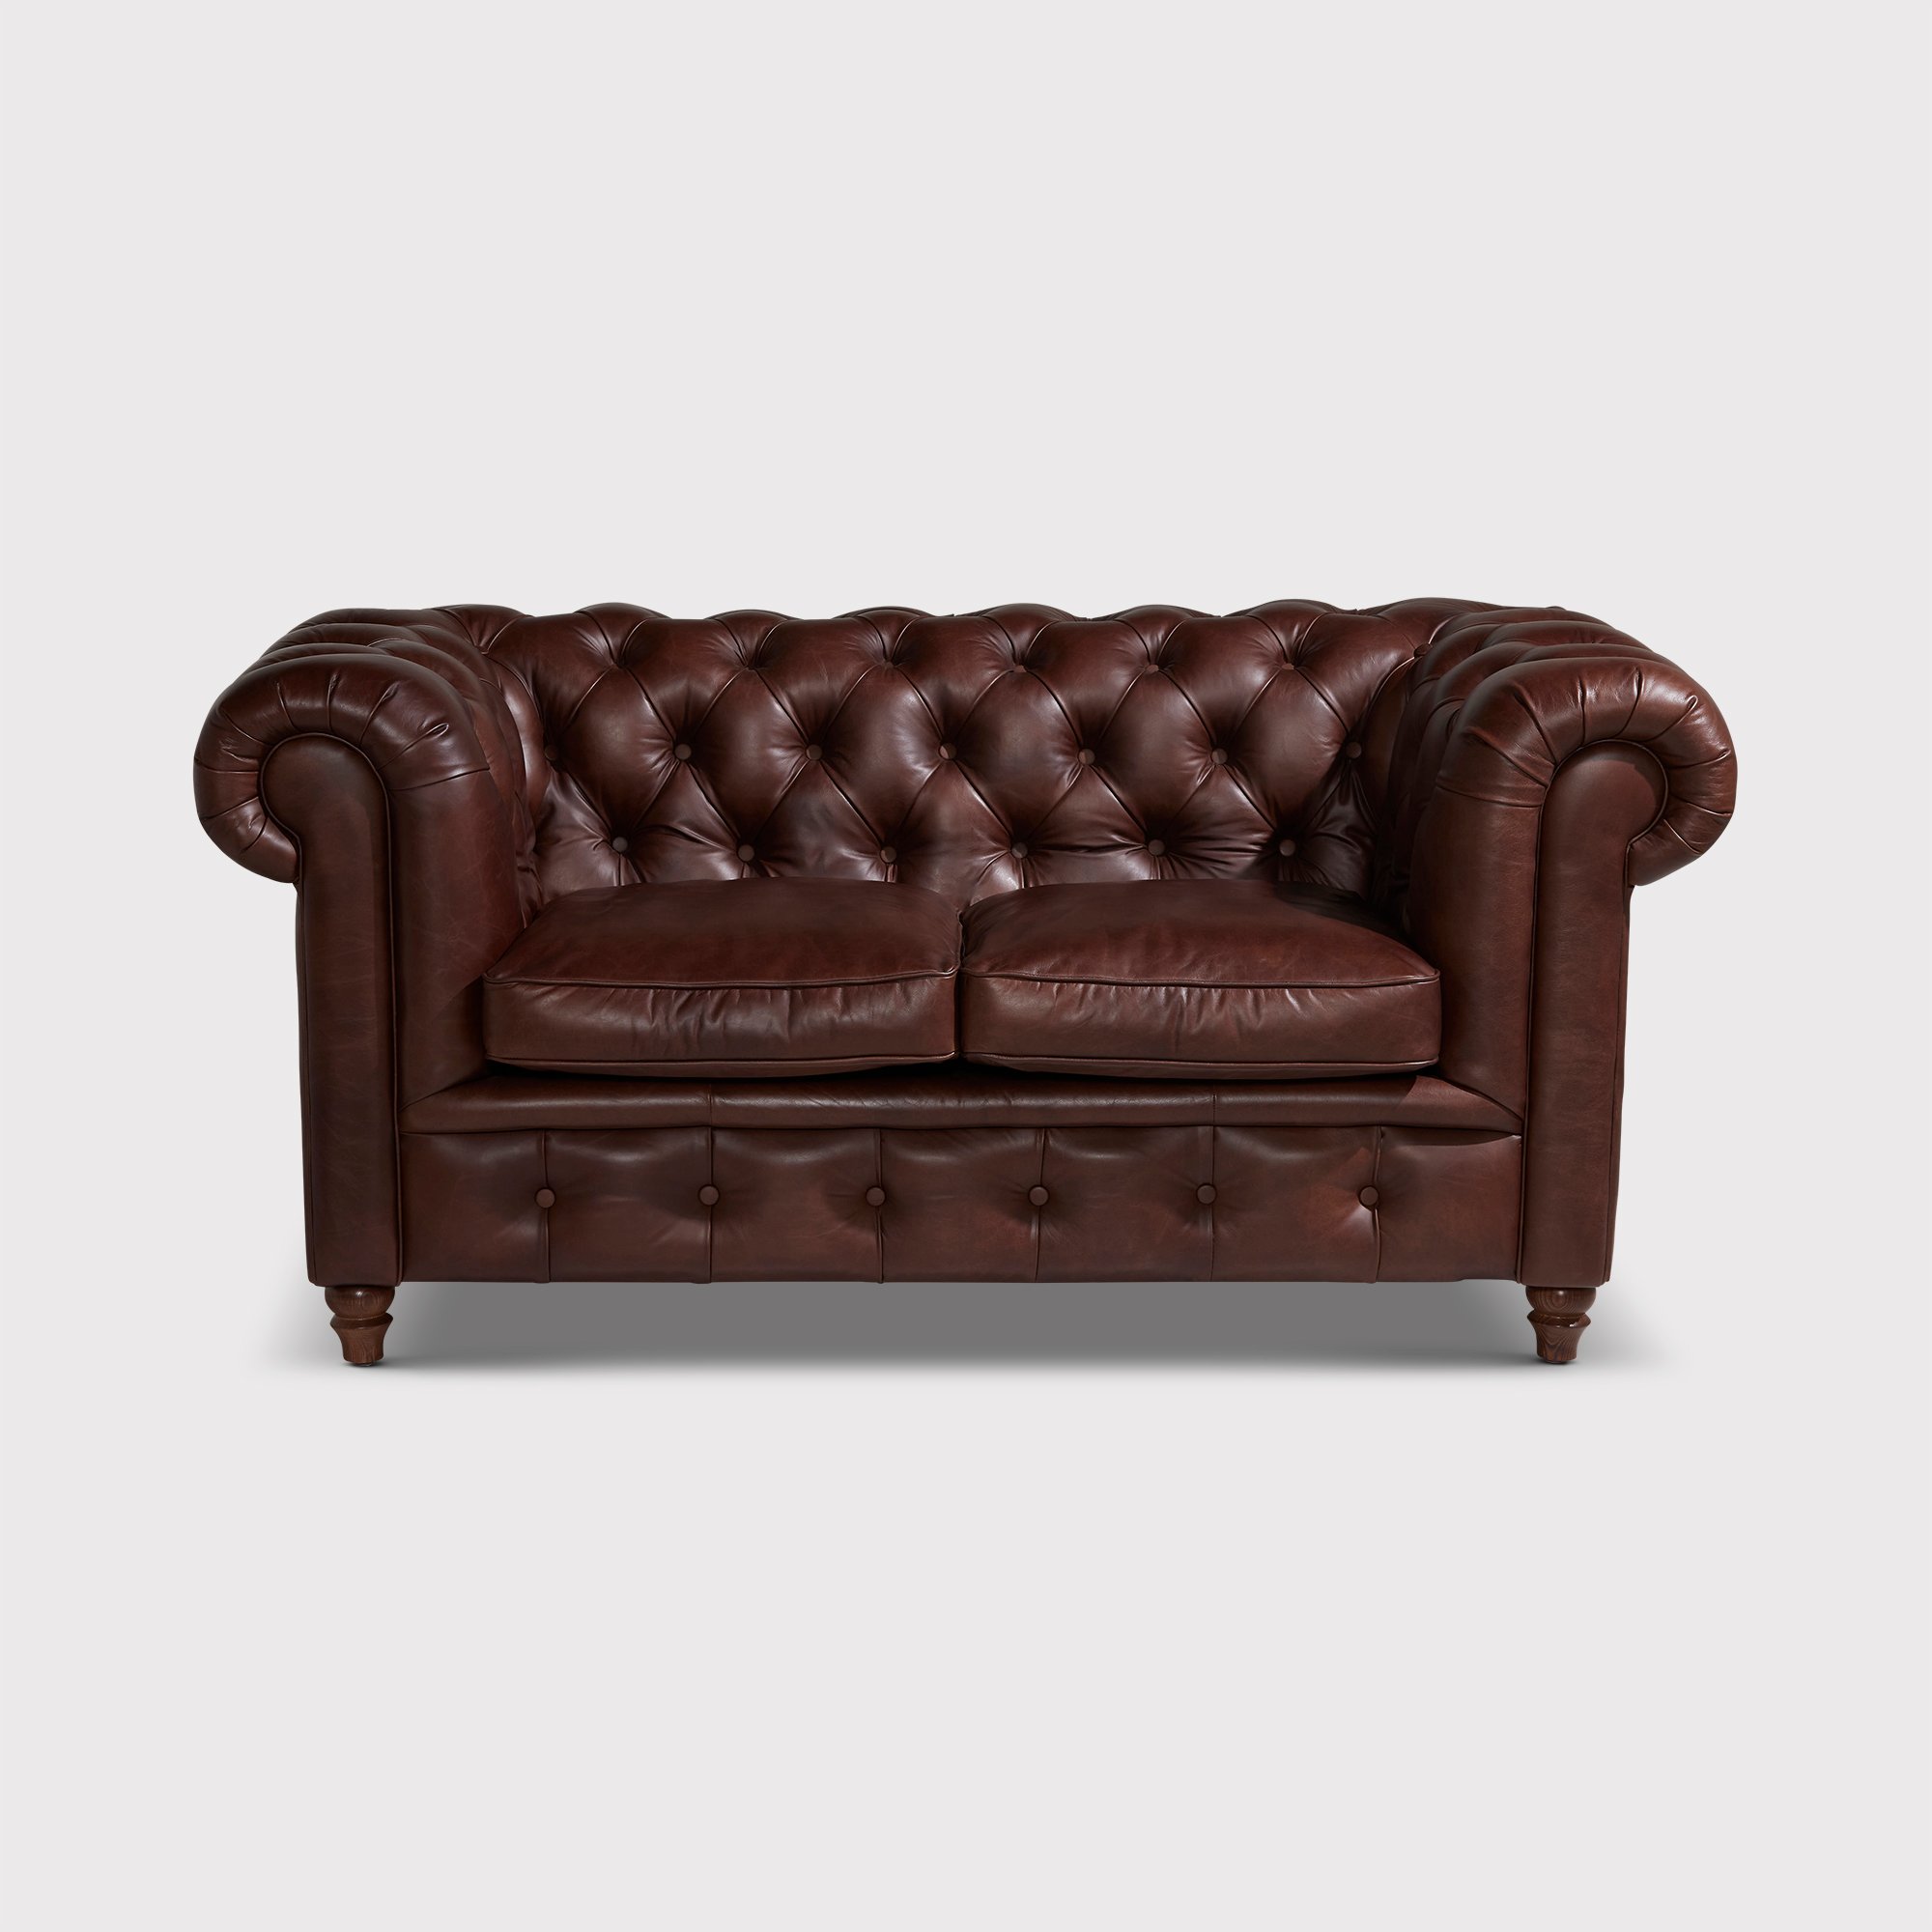 Dalston 2 Seater Sofa, Brown Leather | Barker & Stonehouse